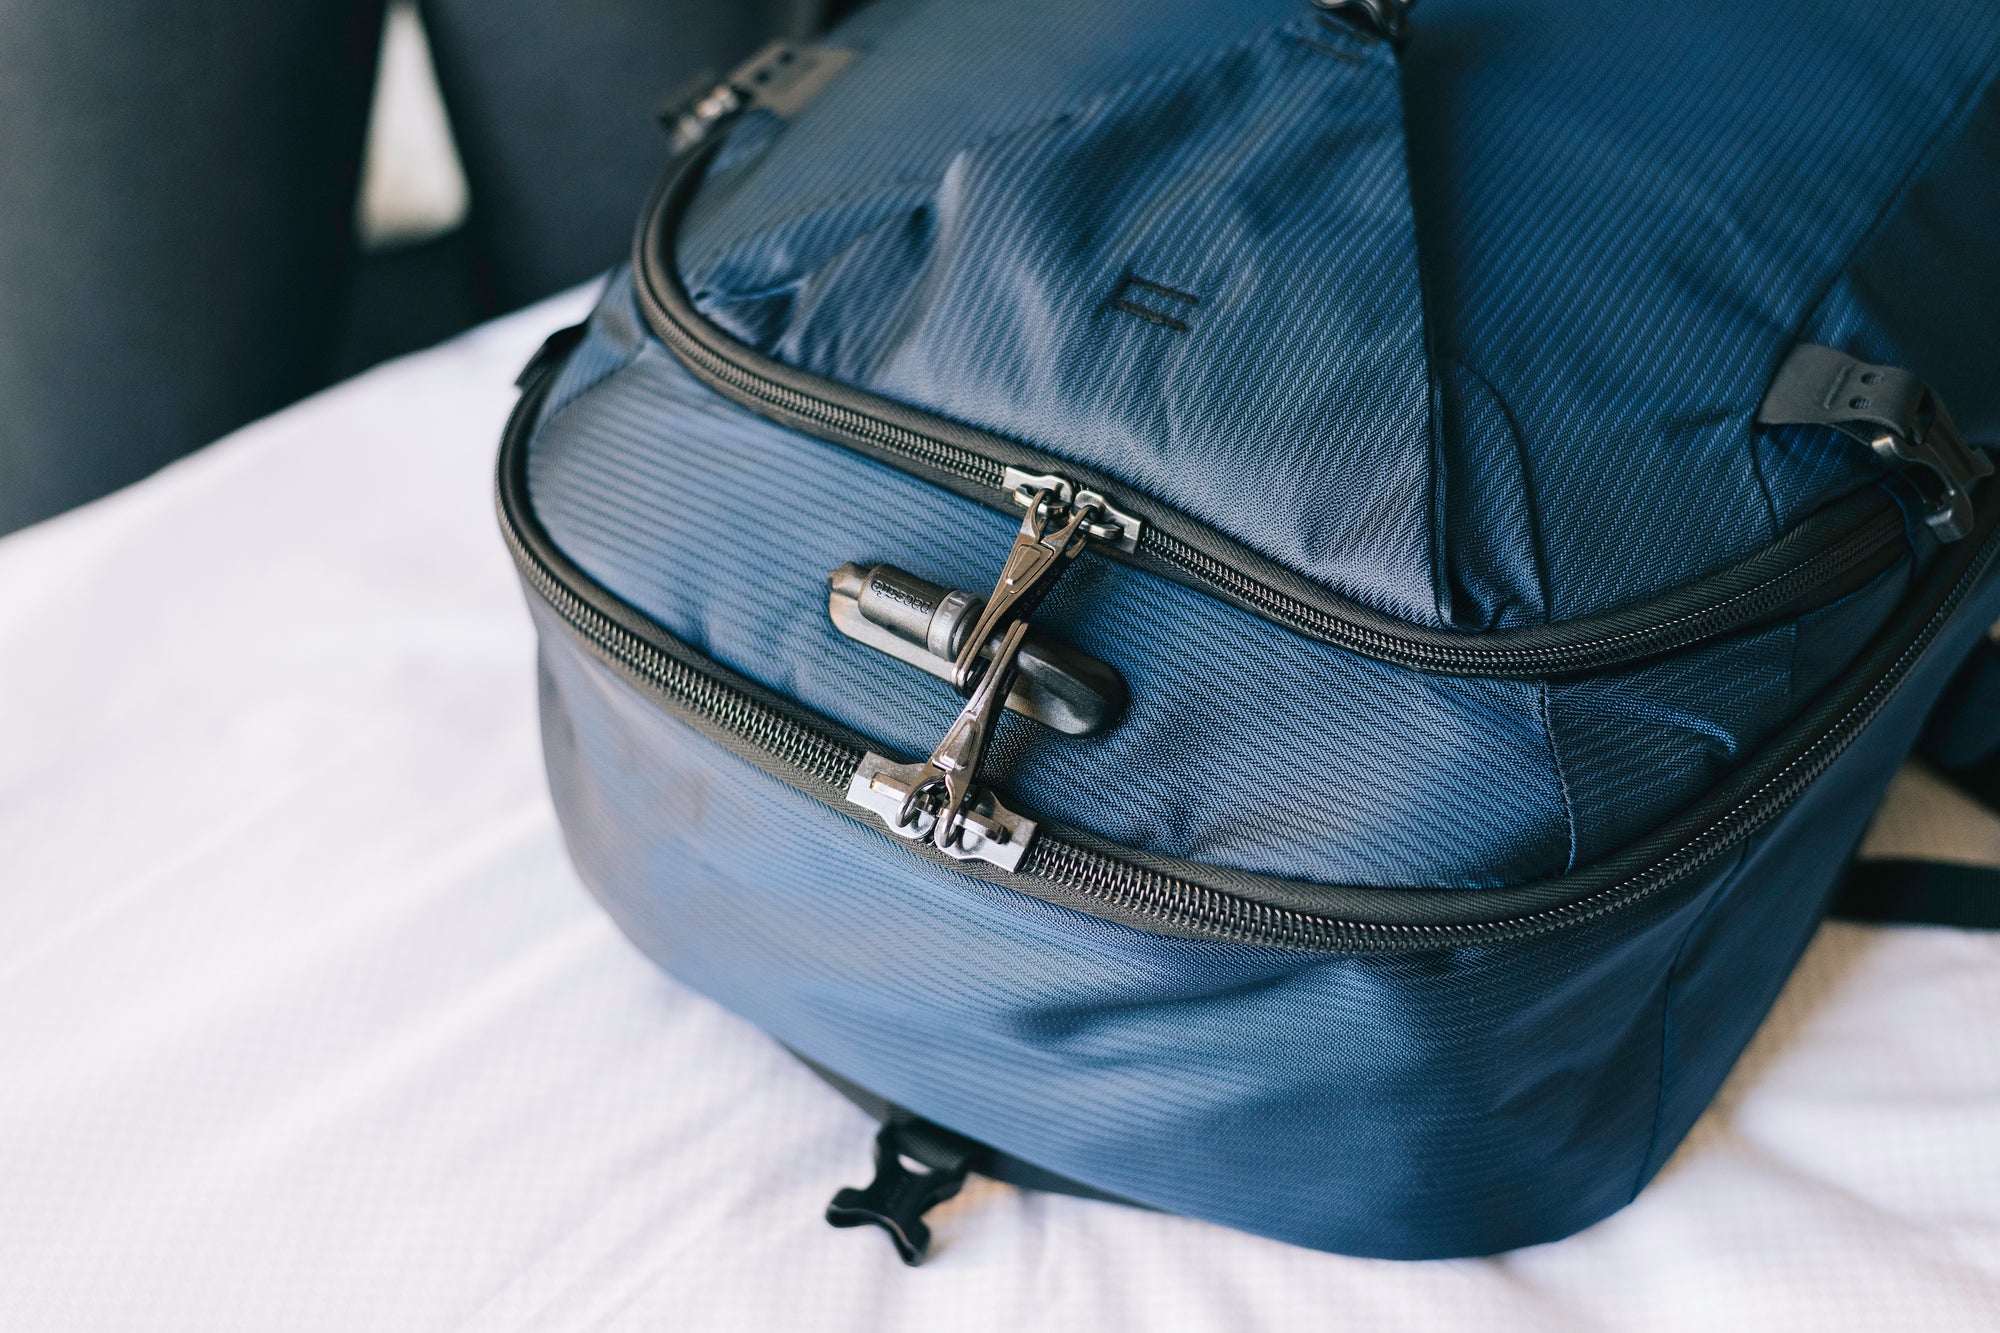 The Best Way To Lock Your Bag – with industrial designer Luke Ritchie